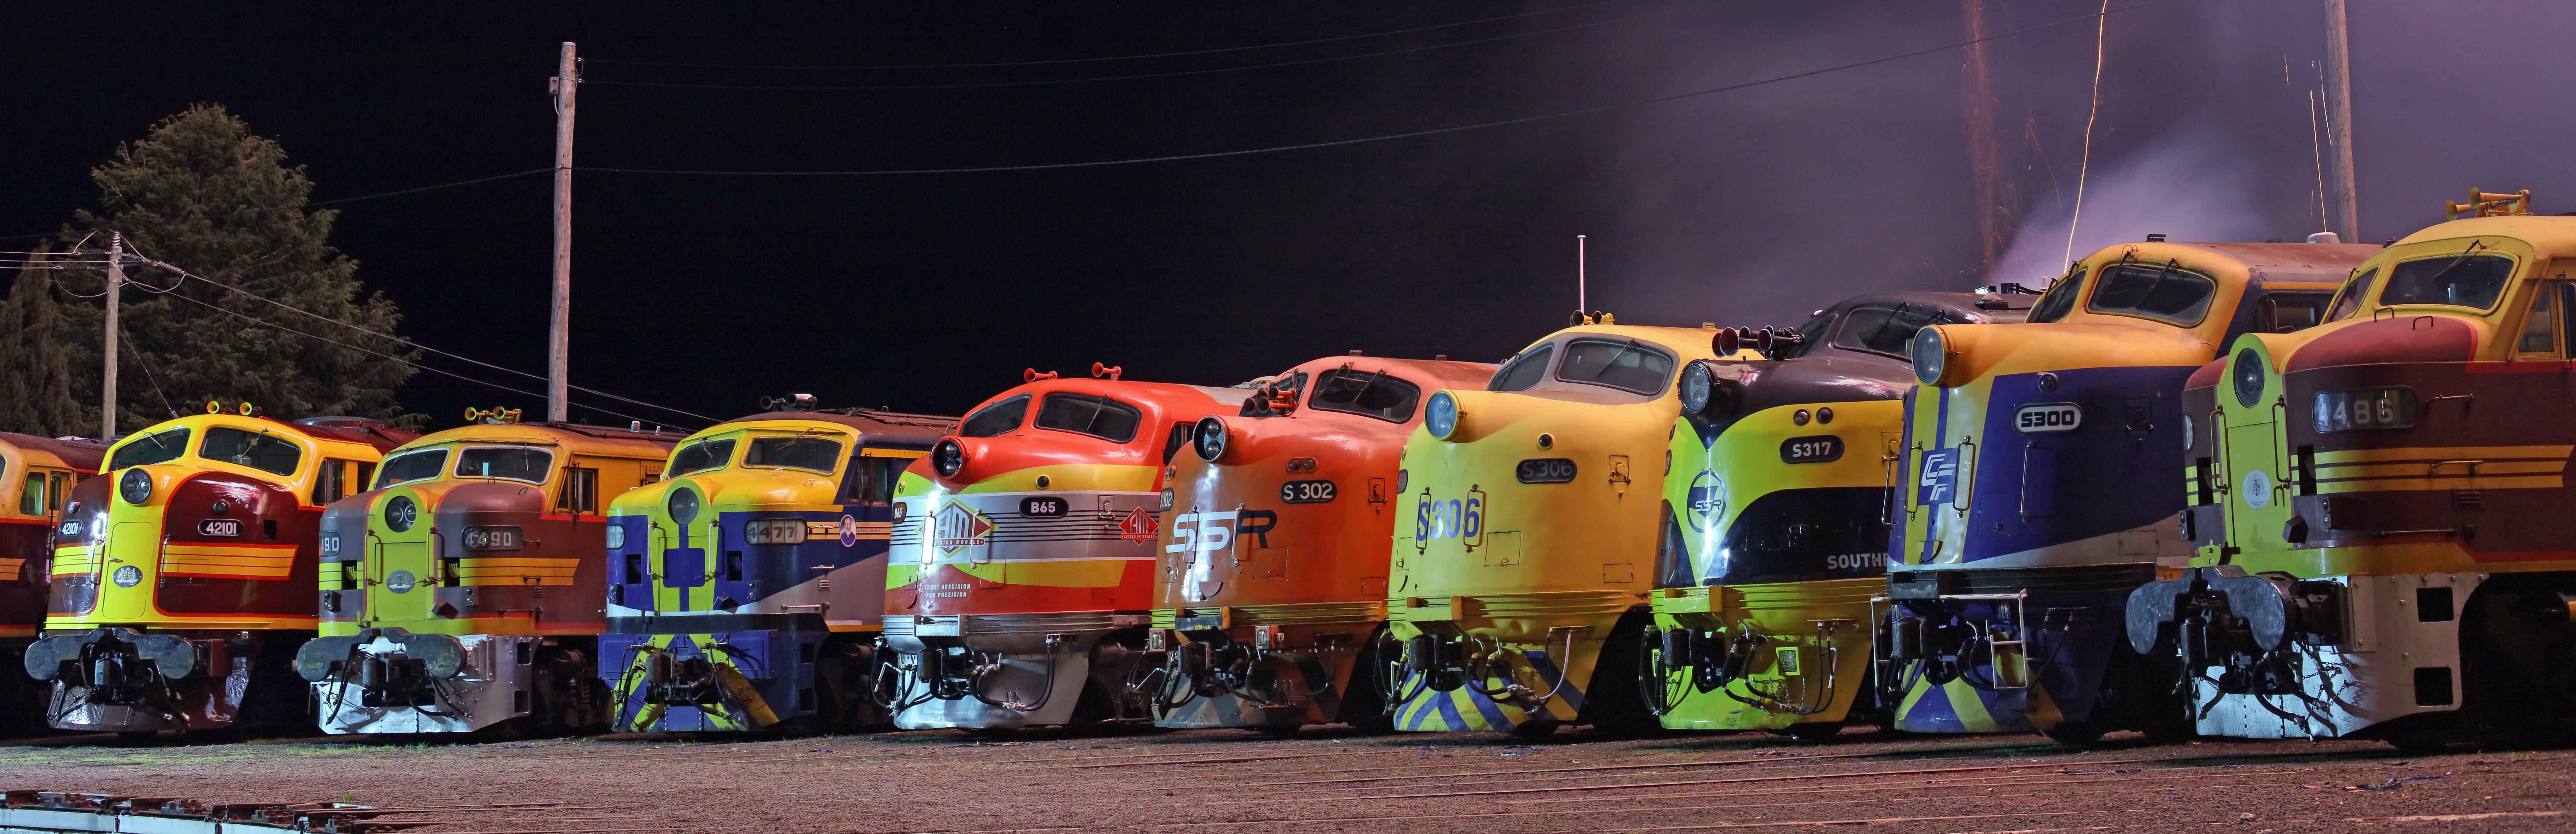 During the night of 1 October 2016 the Streamliners 2016 event in Goulburn (Australia) the following bulldog noses were amongst others enjoying some attention (from left to right): Lachlan Valley Railway 4204;The Heritage Locomotive Company 42101;Transport Heritage NSW 4490;Qube 4477;SSR B65;SSR S302;PN S306;SSR S317;CF Rail Services S300;Lachlan Alco Group 4486.